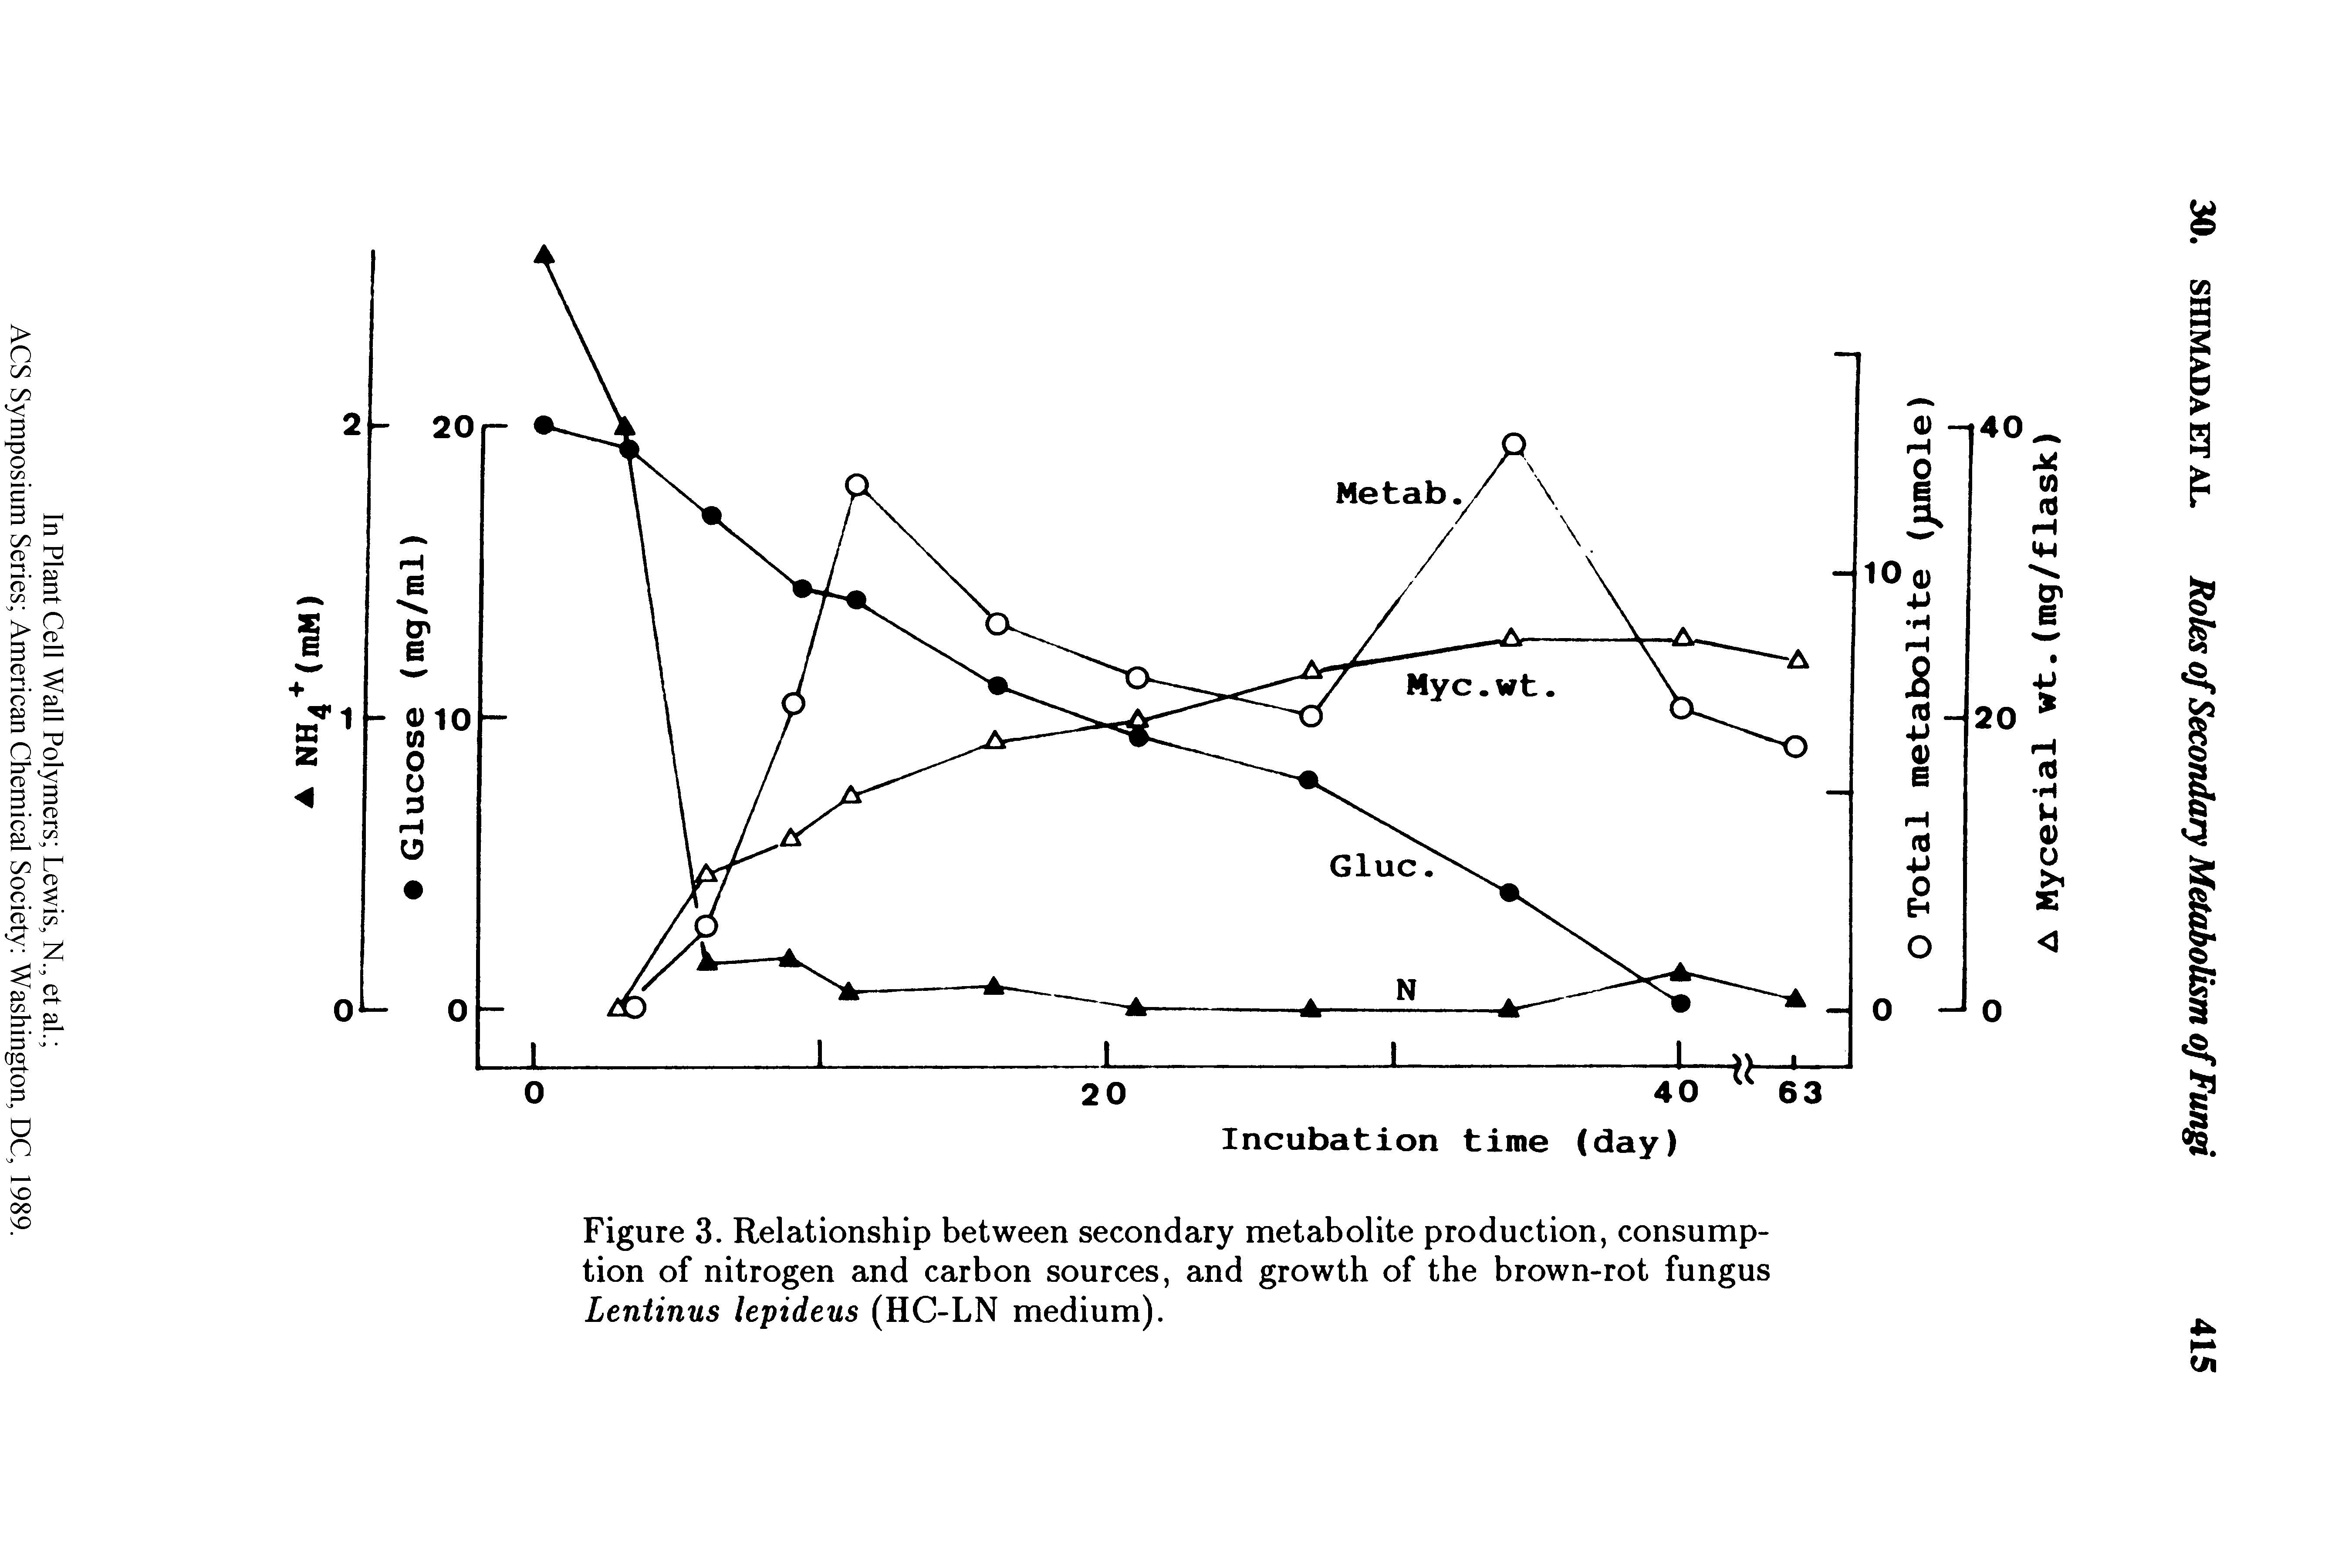 Figure 3. Relationship between secondary metabolite production, consumption of nitrogen and carbon sources, and growth of the brown-rot fungus Lentinus lepideus (HC-LN medium).